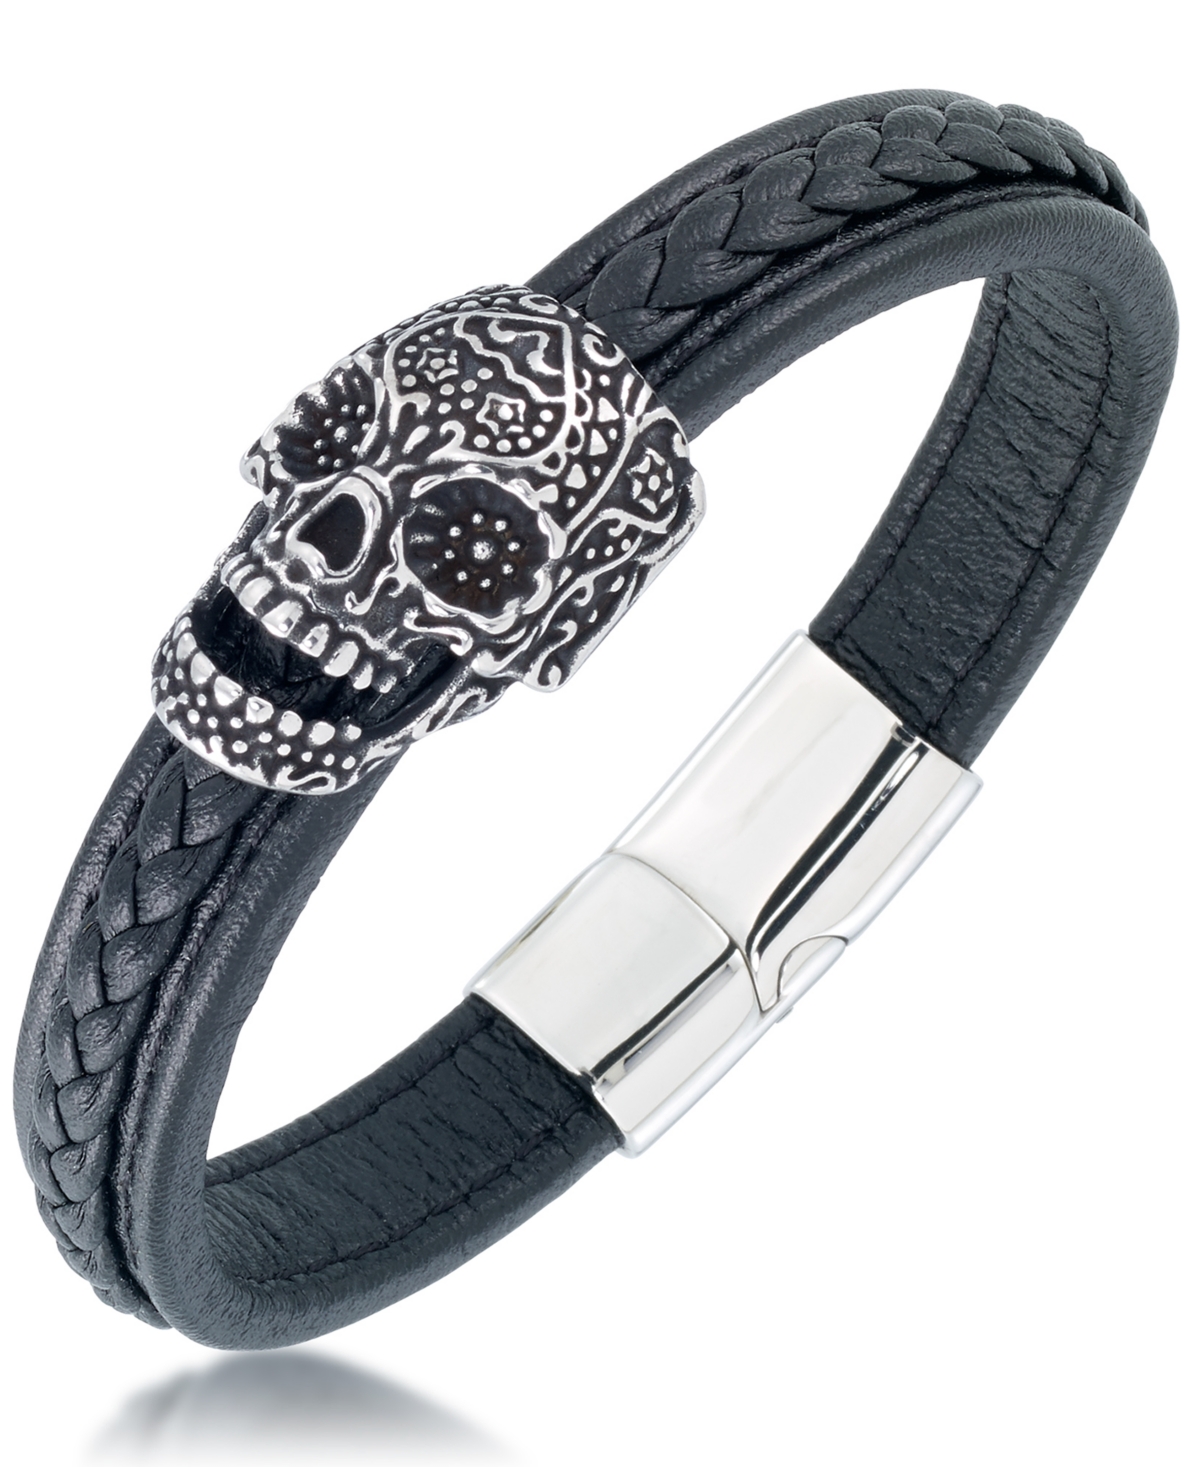 Andrew Charles by Andy Hilfiger Men's Ornamental Skull Leather Bracelet in Stainless Steel